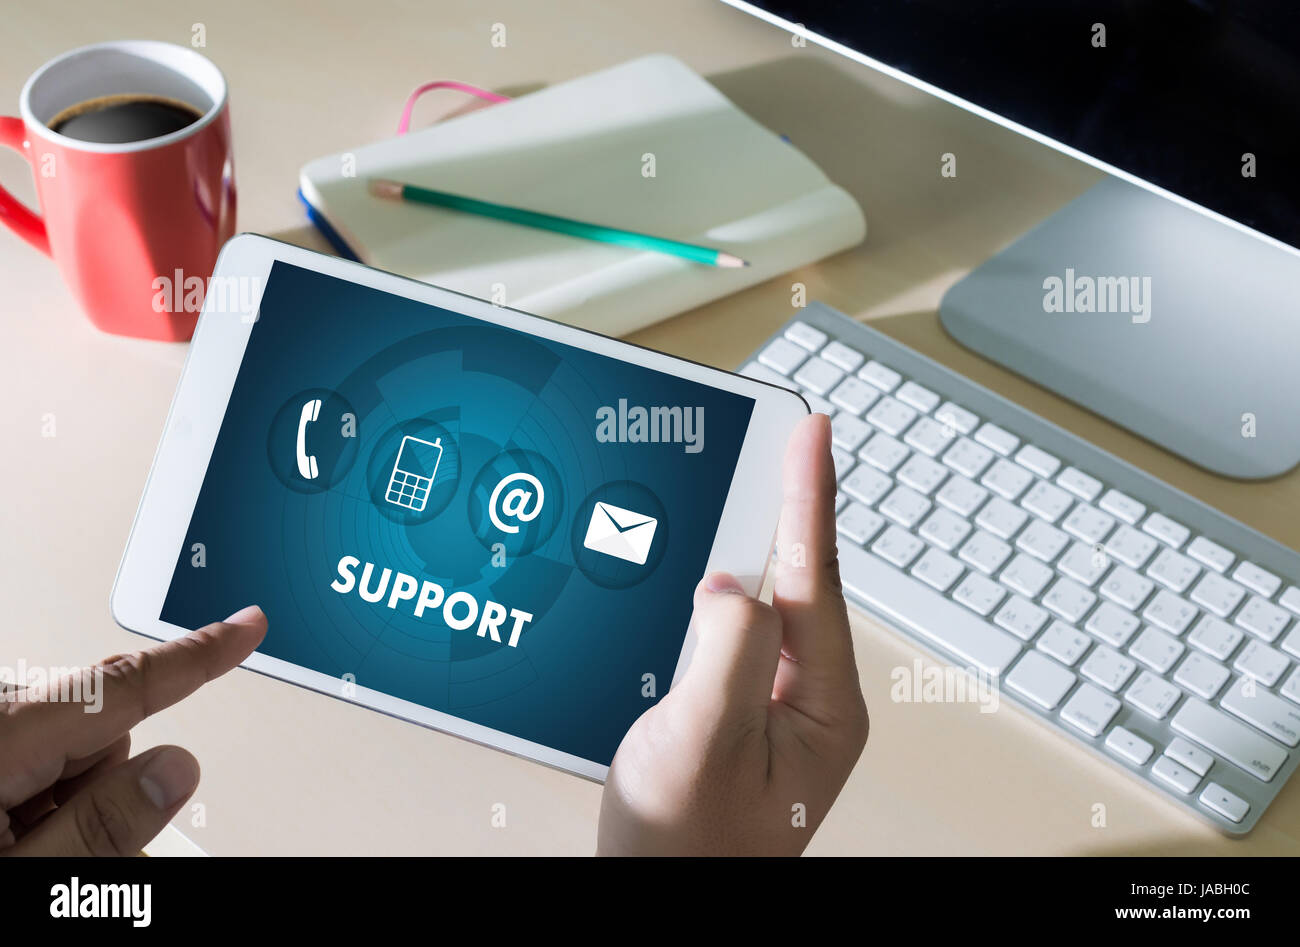 SUPPORT technology and  internet and networking businessman team Group concept Stock Photo